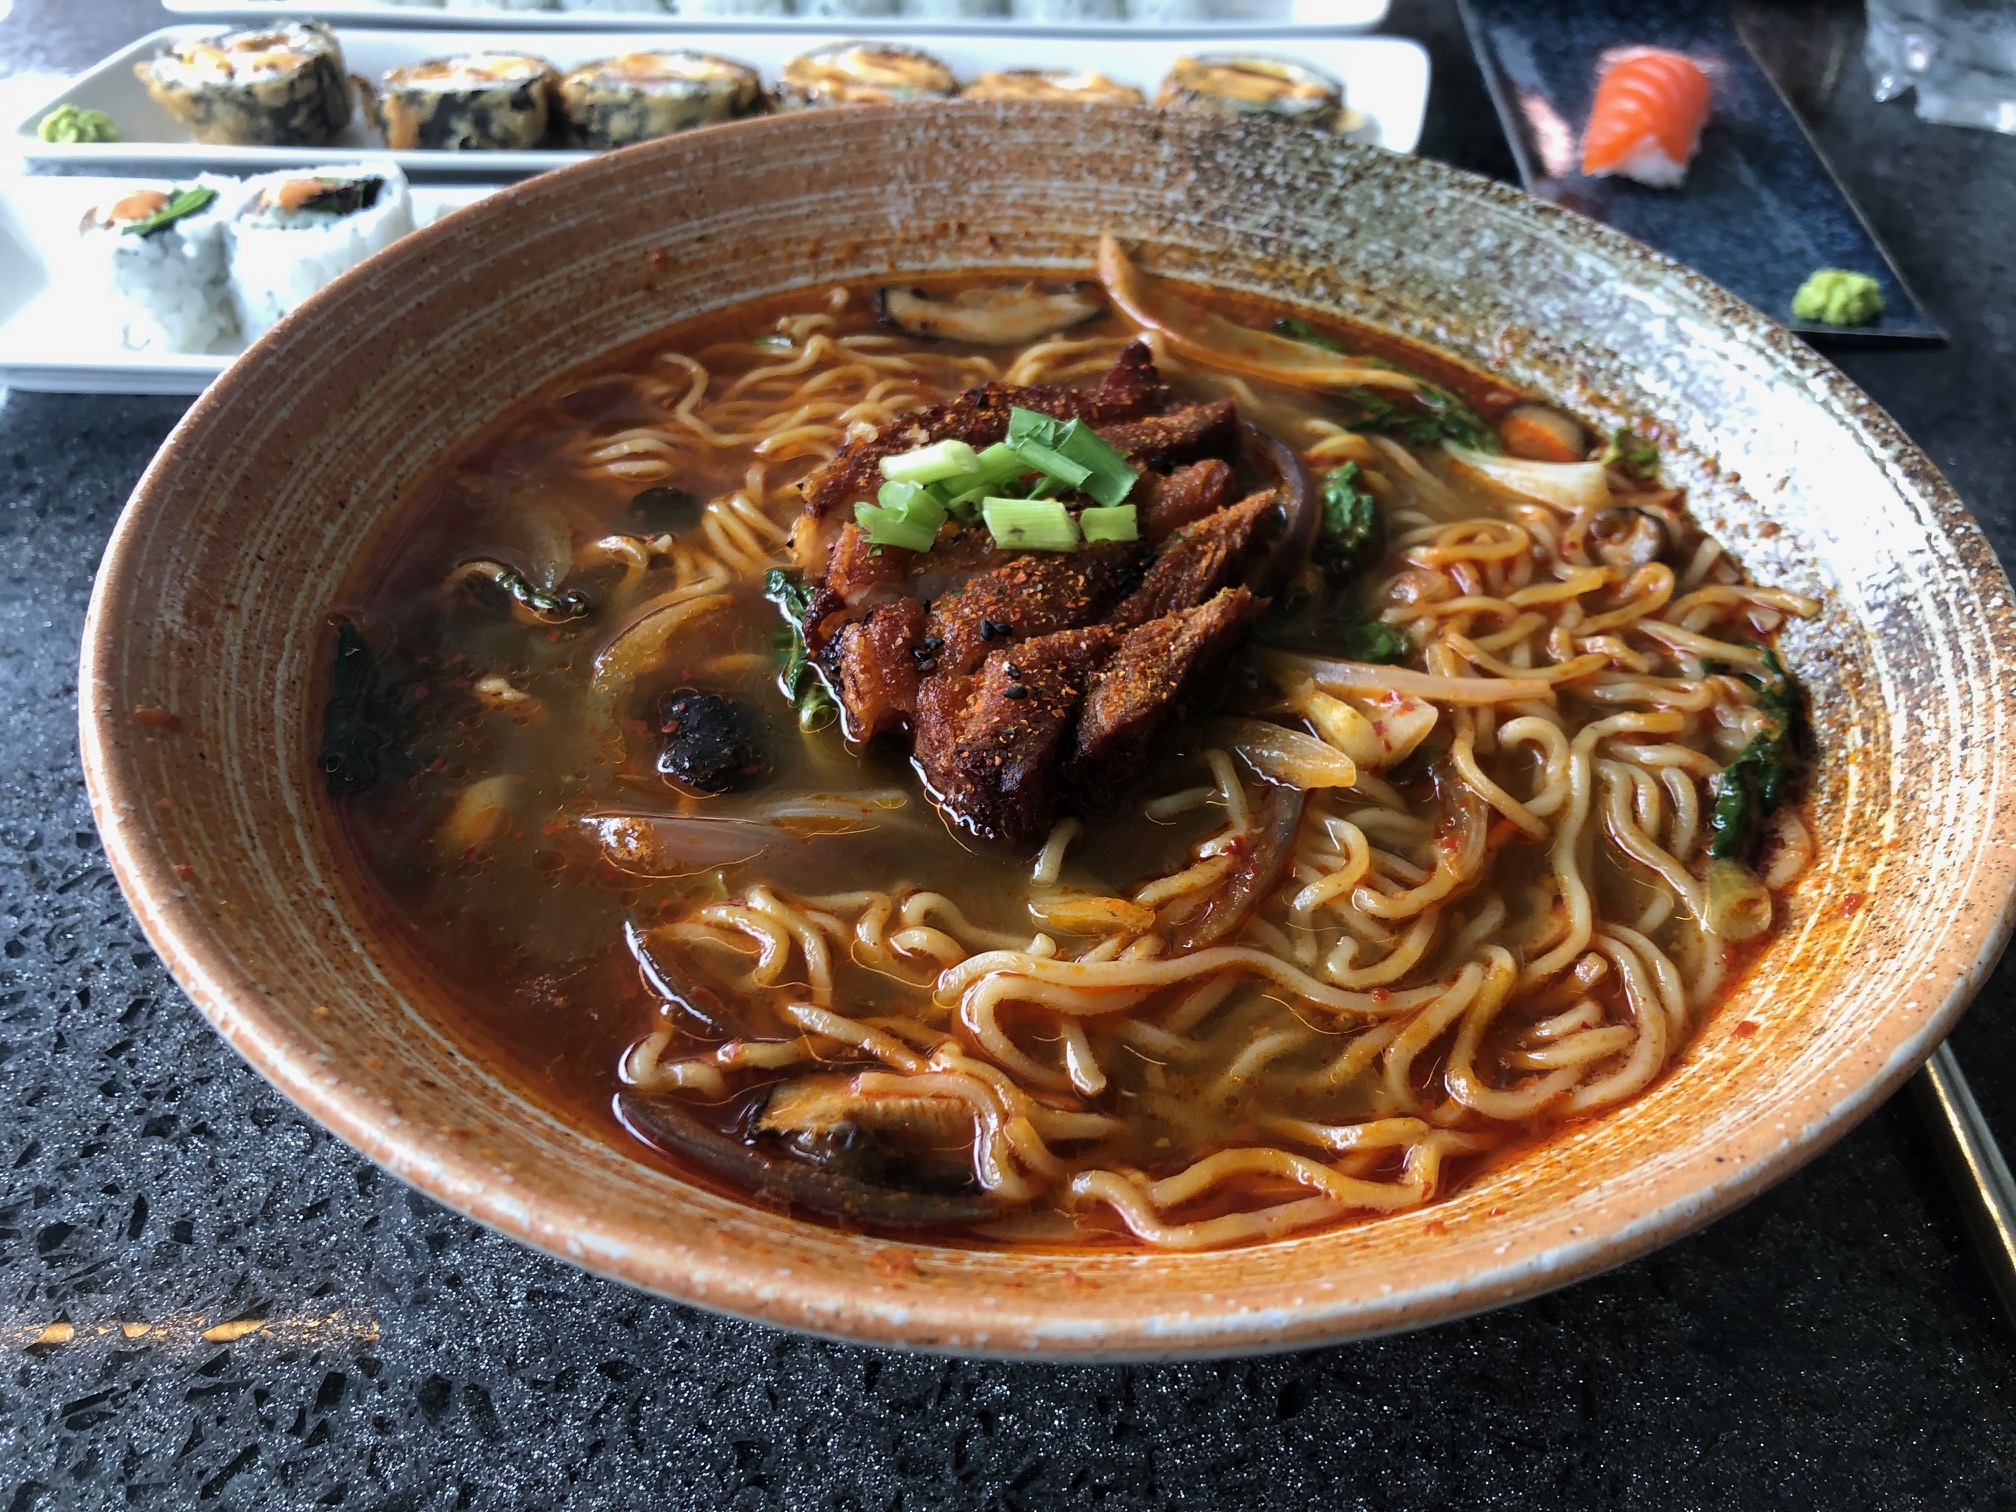 In a beige bowl, there is pork belly ramen. The ramen noodles float in a reddish broth with charred pork belly on top. Photo by Alyssa Buckley.